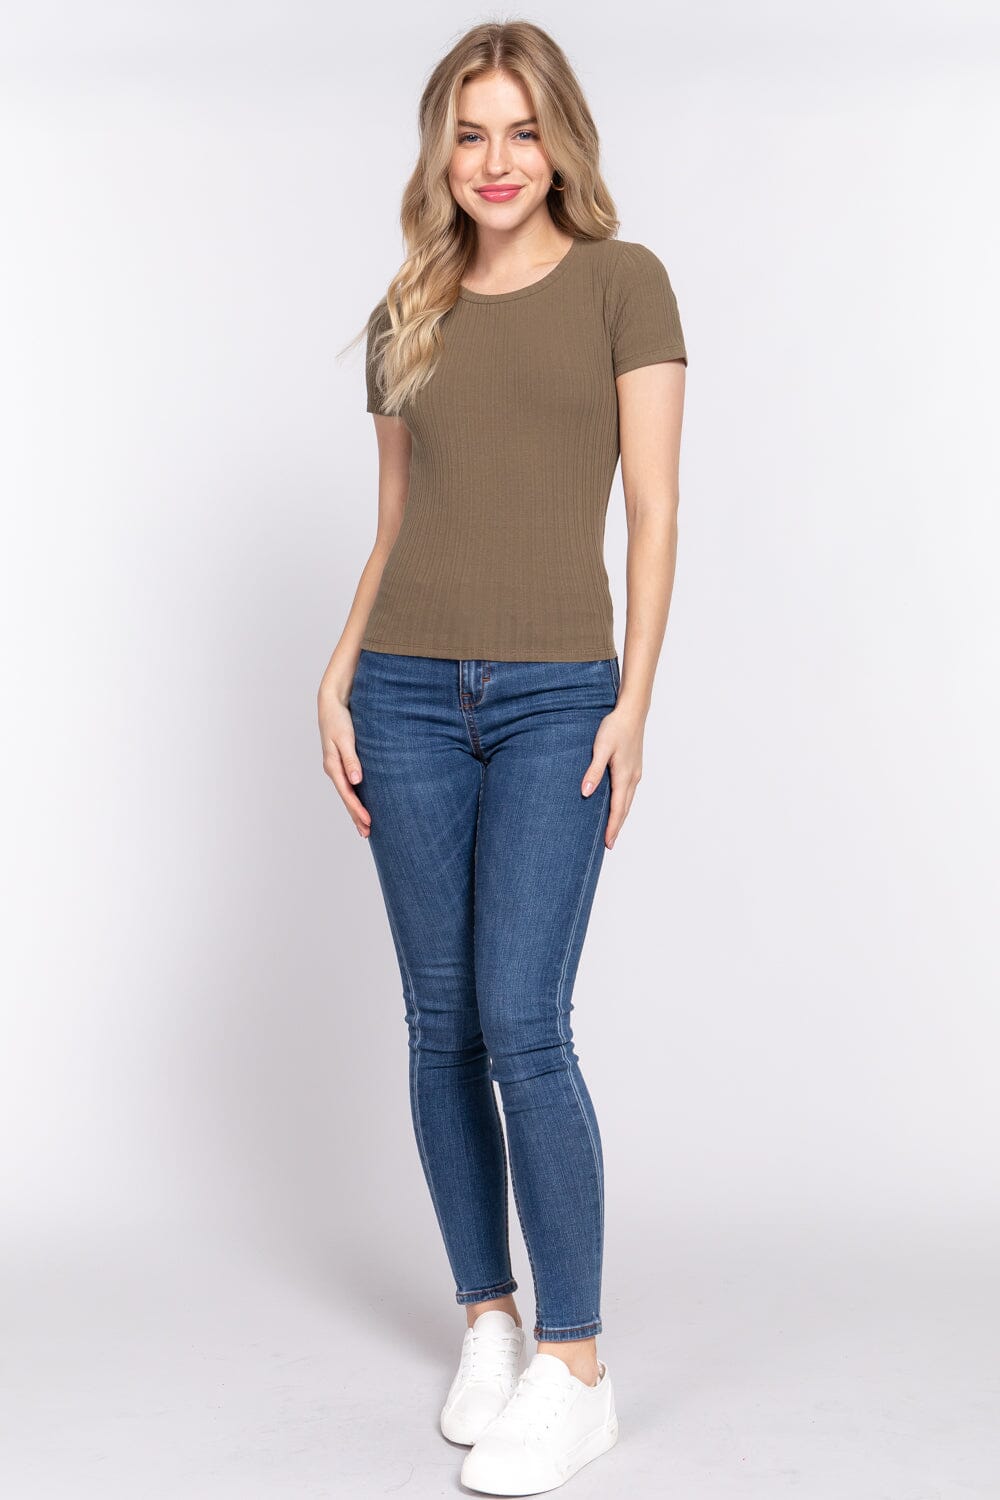 Olive Green Basic Casual Short Sleeve Crew Neck Variegated Rib Knit Top Shirts & Tops jehouze S 